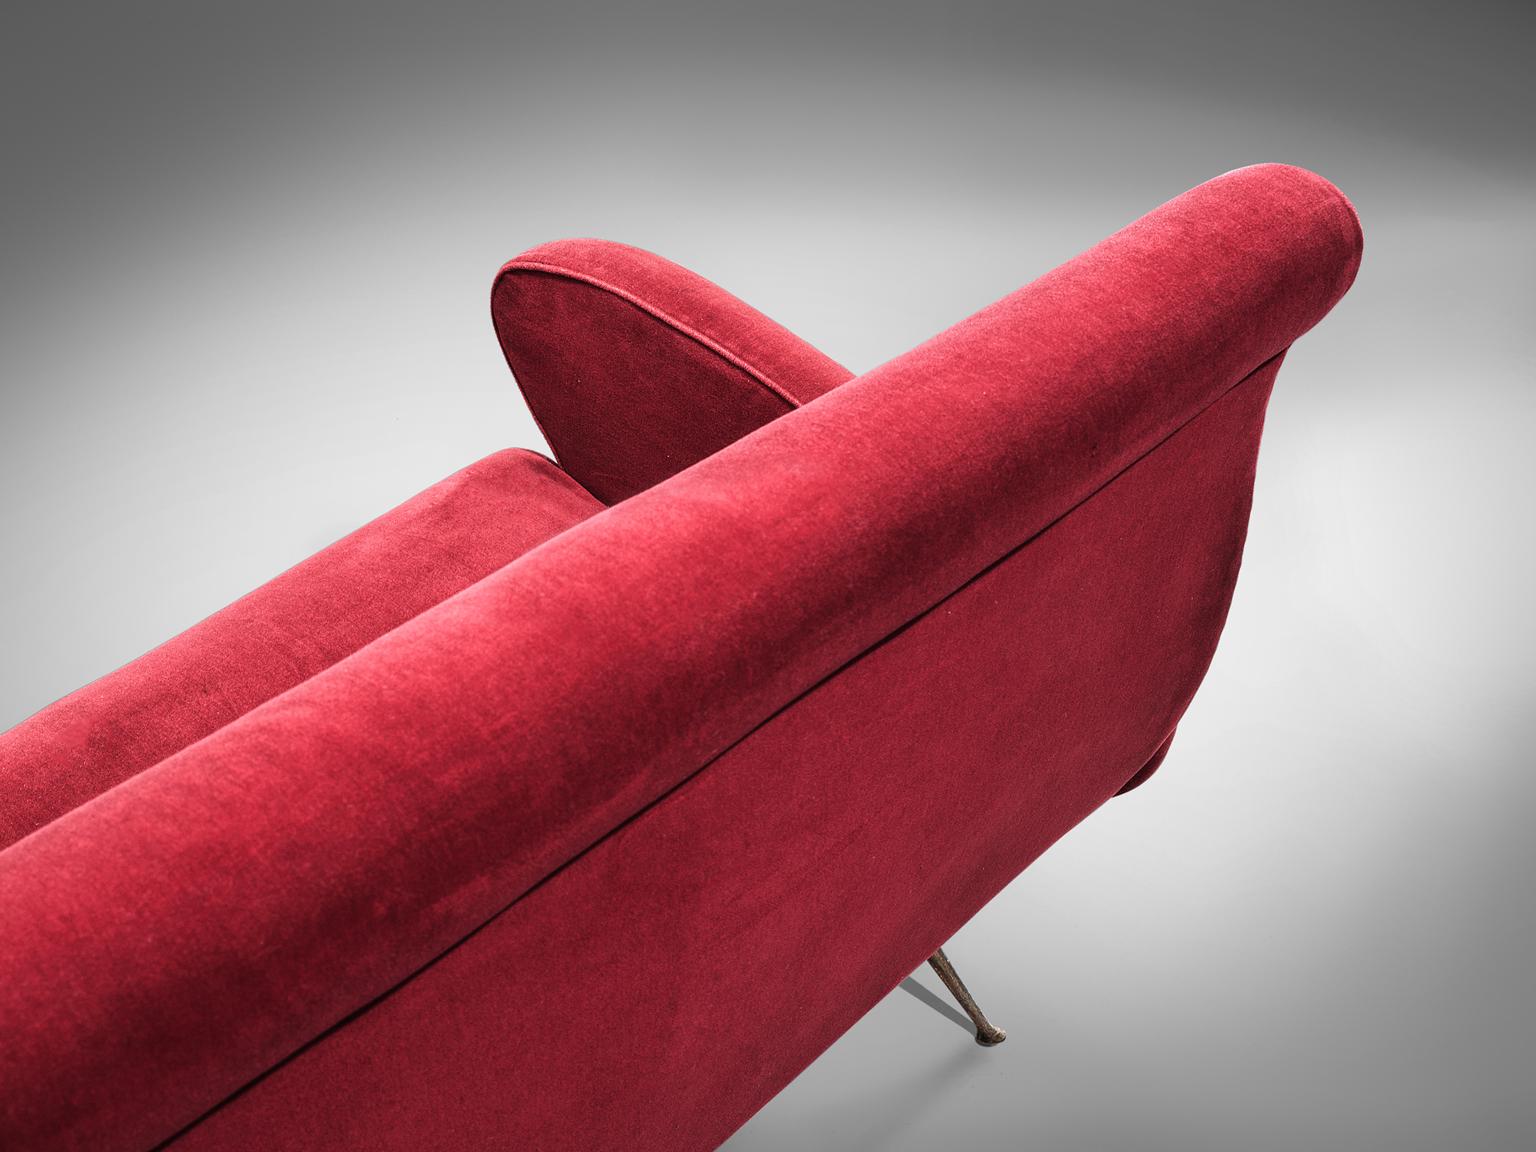 Lounge set, red velvet, brass, Italy, 1950s. 

This set is an iconic example of Italian design from the fifties. Organic and sculptural, the two seat sofa and two matching lounge chairs with ottomans is anything but minimalistic. Equipped with the